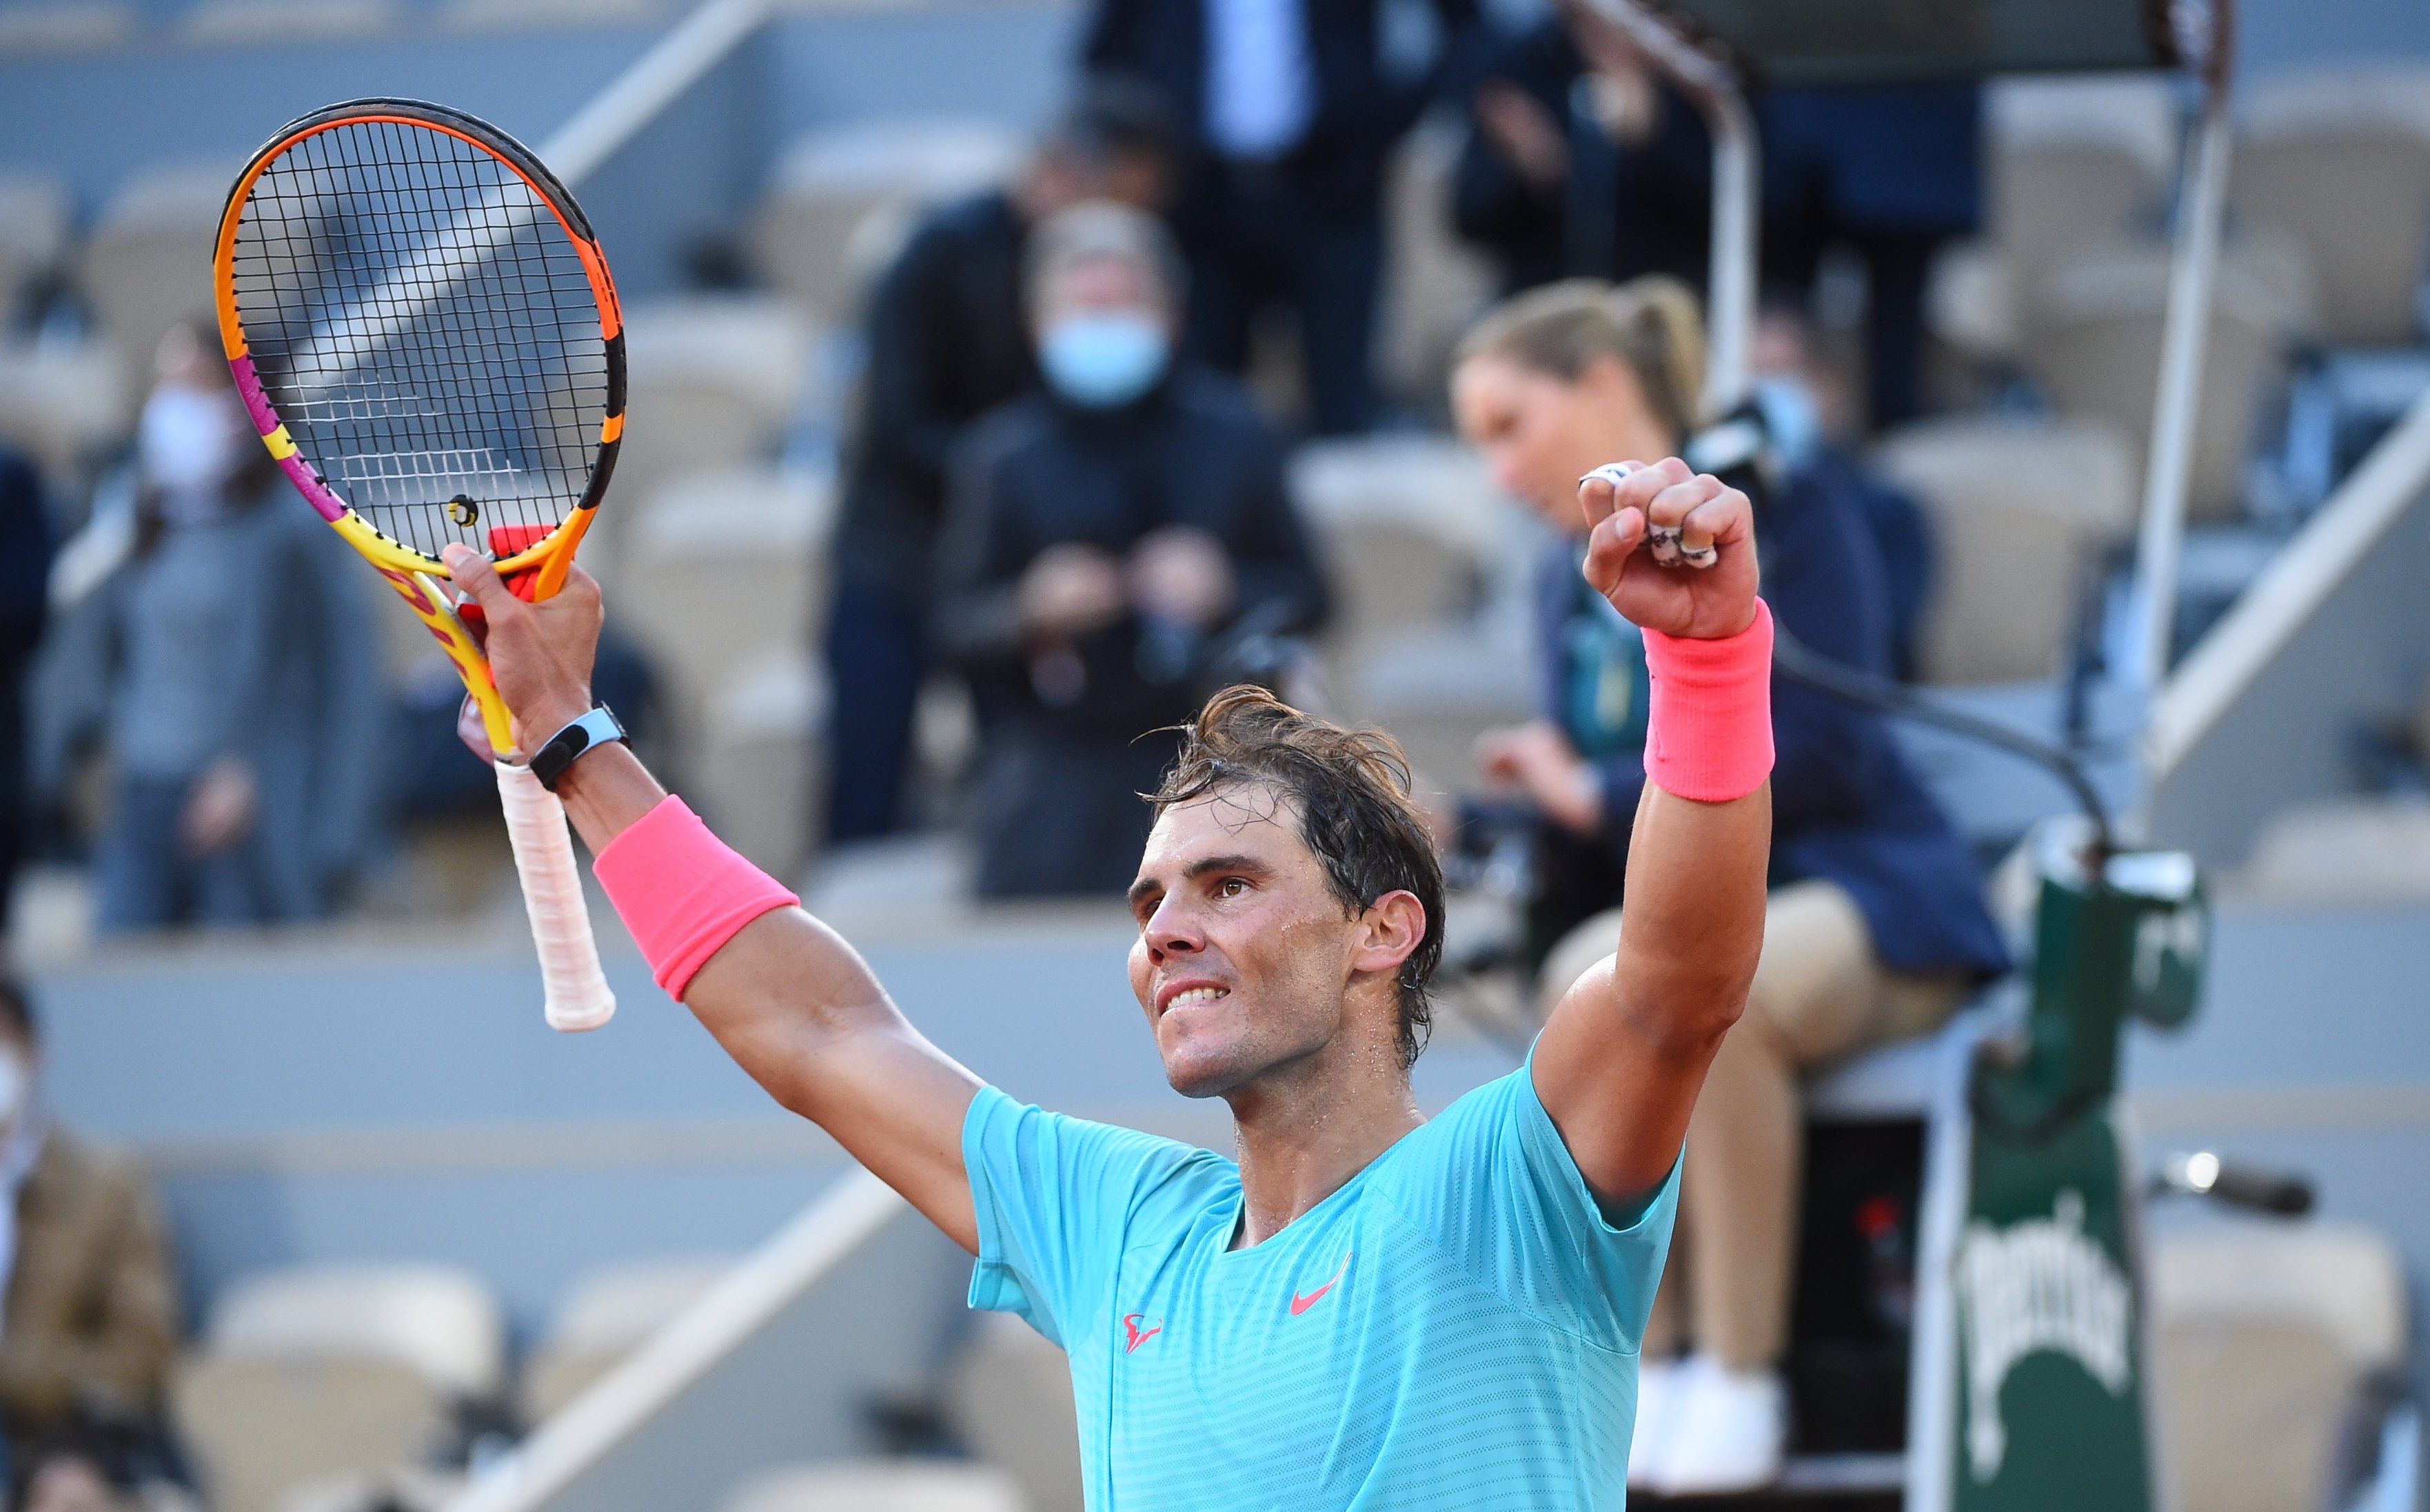 ‘Nadal’s Paris record will never be beaten’, predicts Murray